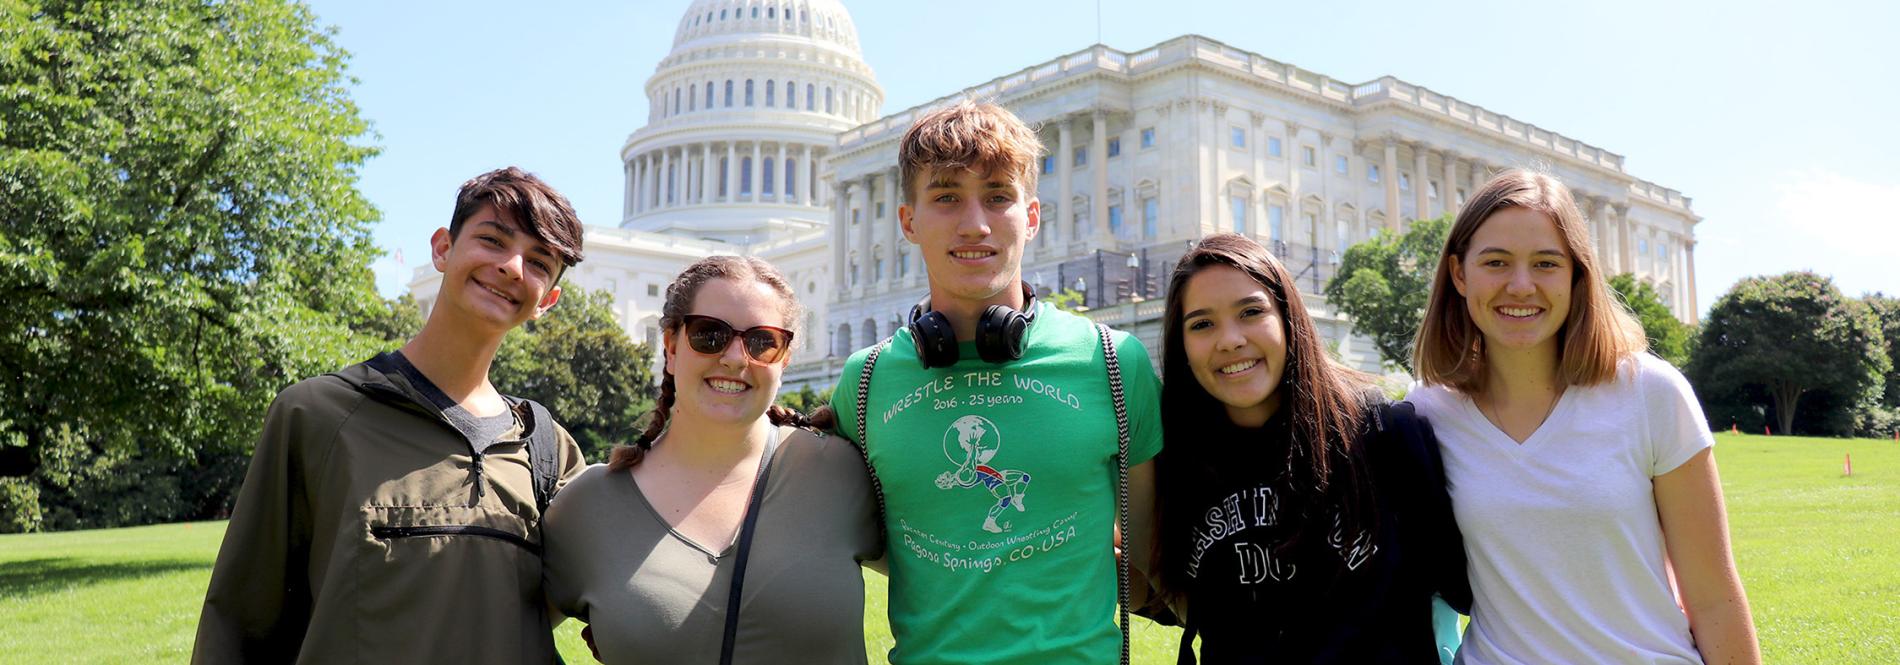 High school juniors invited to apply for trip to Washington D.C.